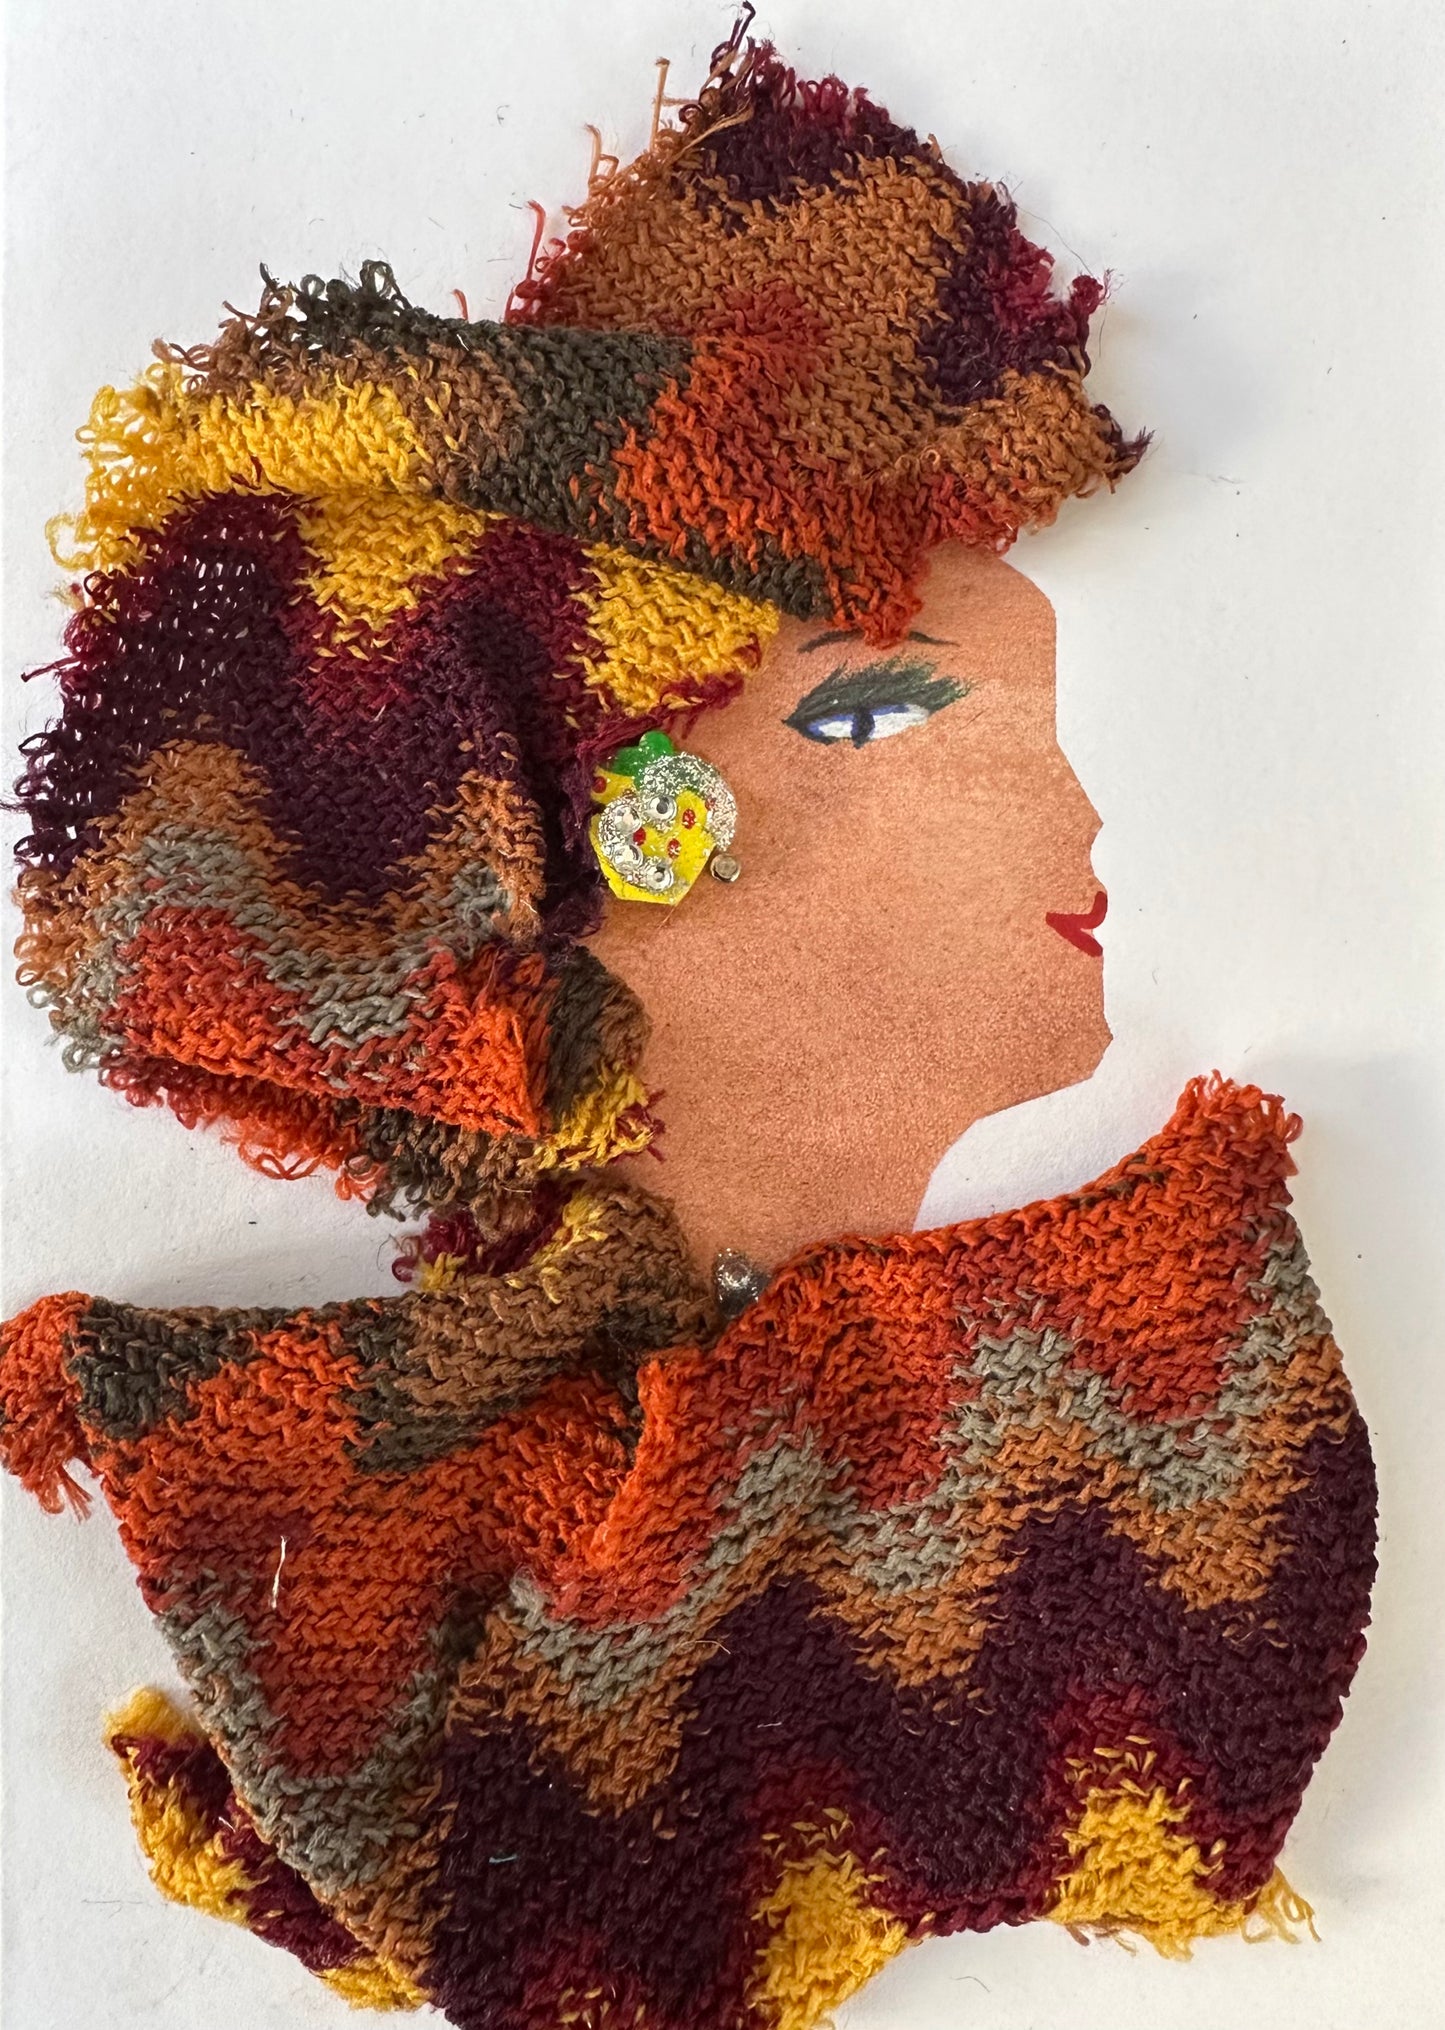 I designed this handmade card of a woman dressed in a burnt orange, burgundy, yellow, and other fall colour blouse and hatinator. They are btoh a knitted material. Her earring is a brighter yellow.